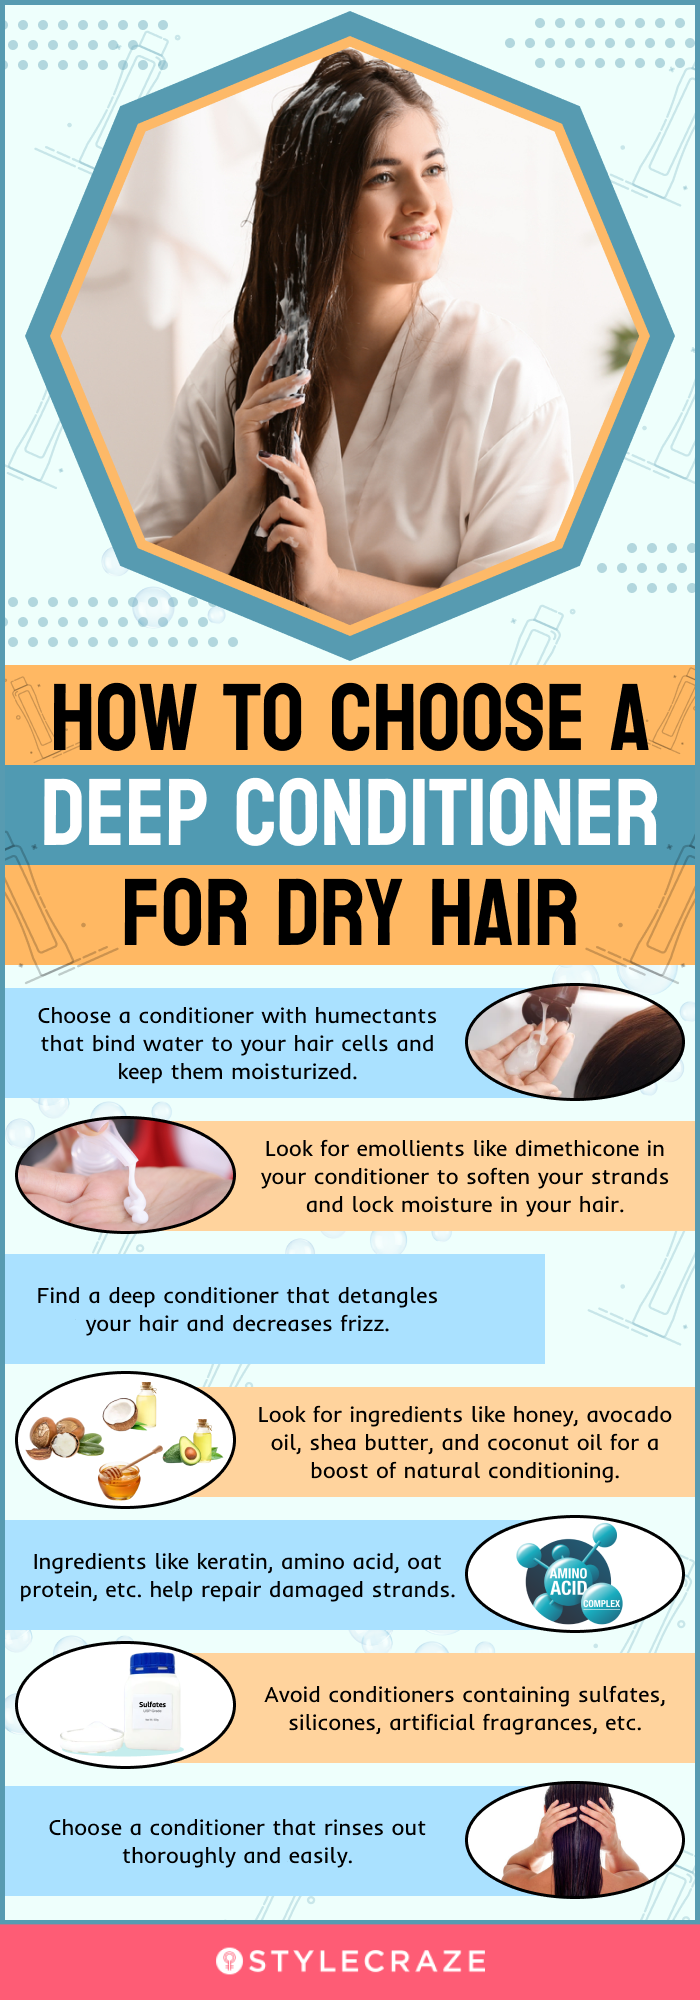 10 Best Drugstore Deep Conditioners For Dry Hair, Hairstylist's Picks